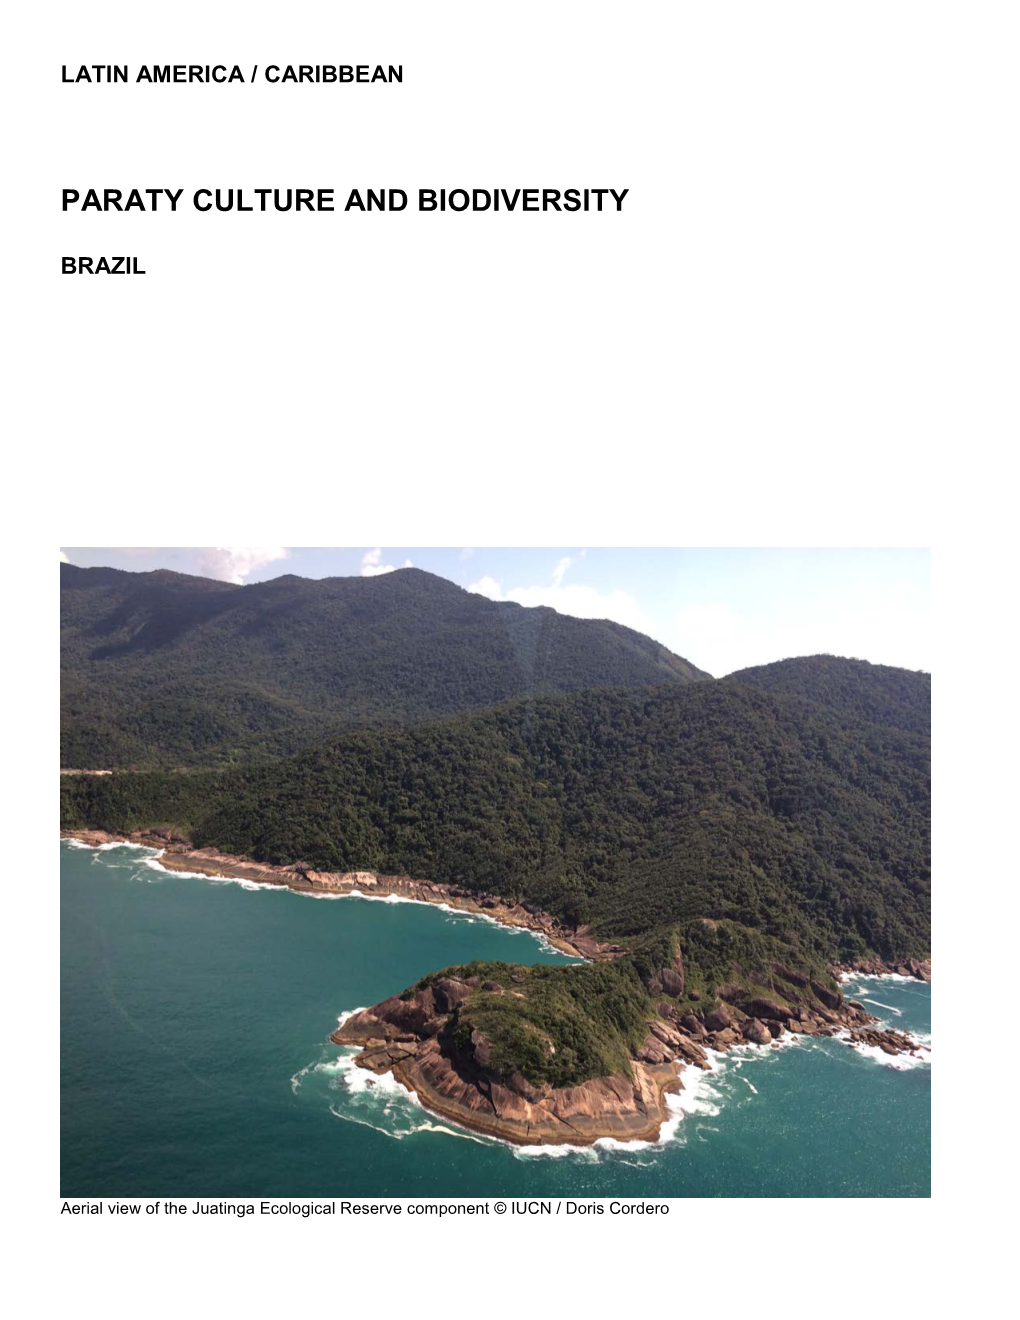 Paraty Culture and Biodiversity